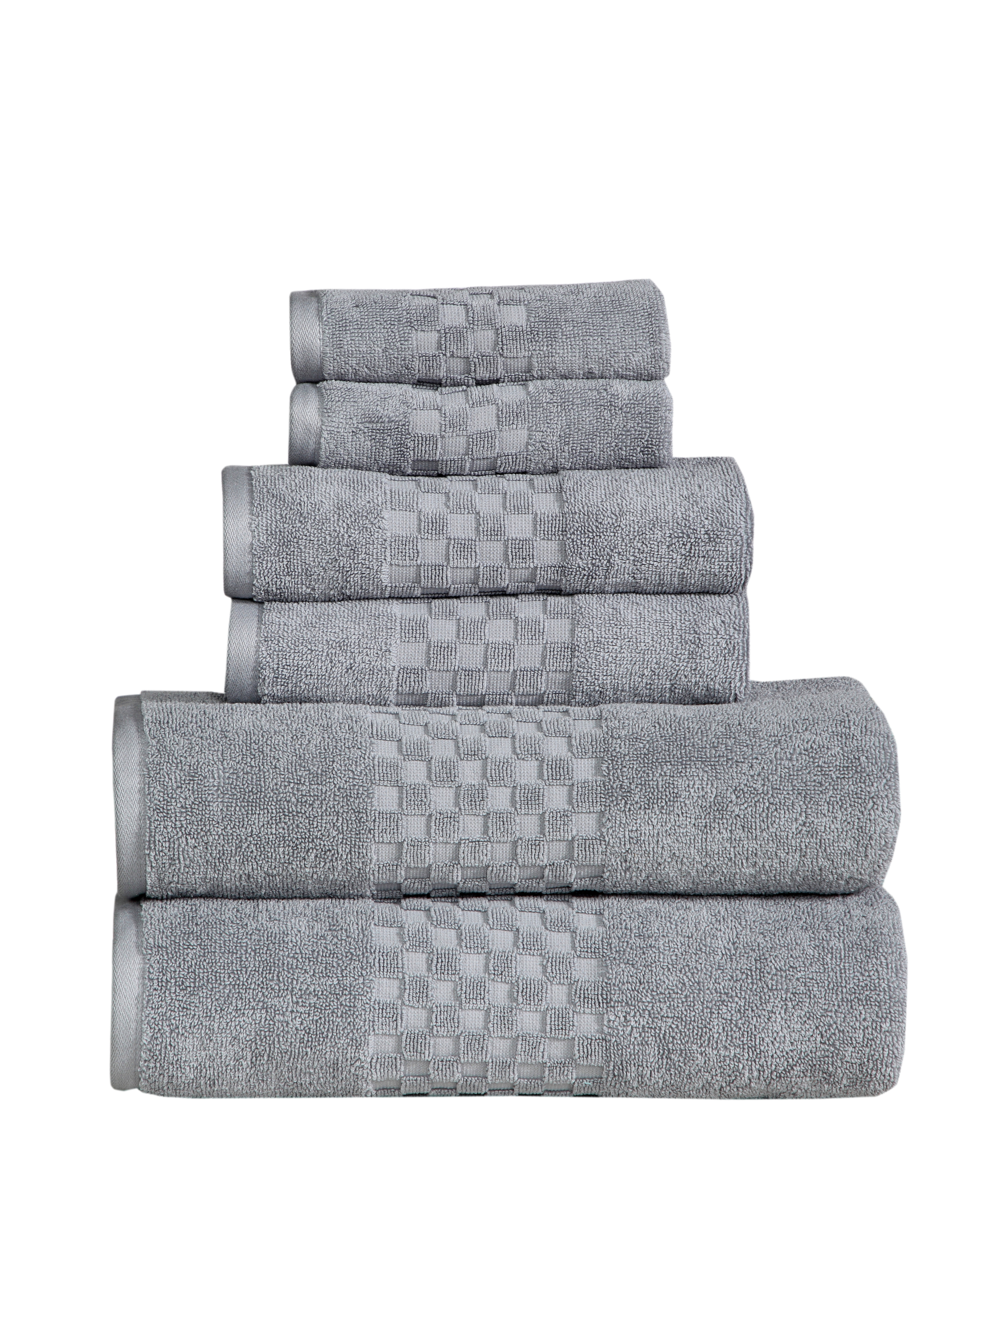 Feather & Stitch 6 Piece Sets of Bathroom Towels - 100% Cotton